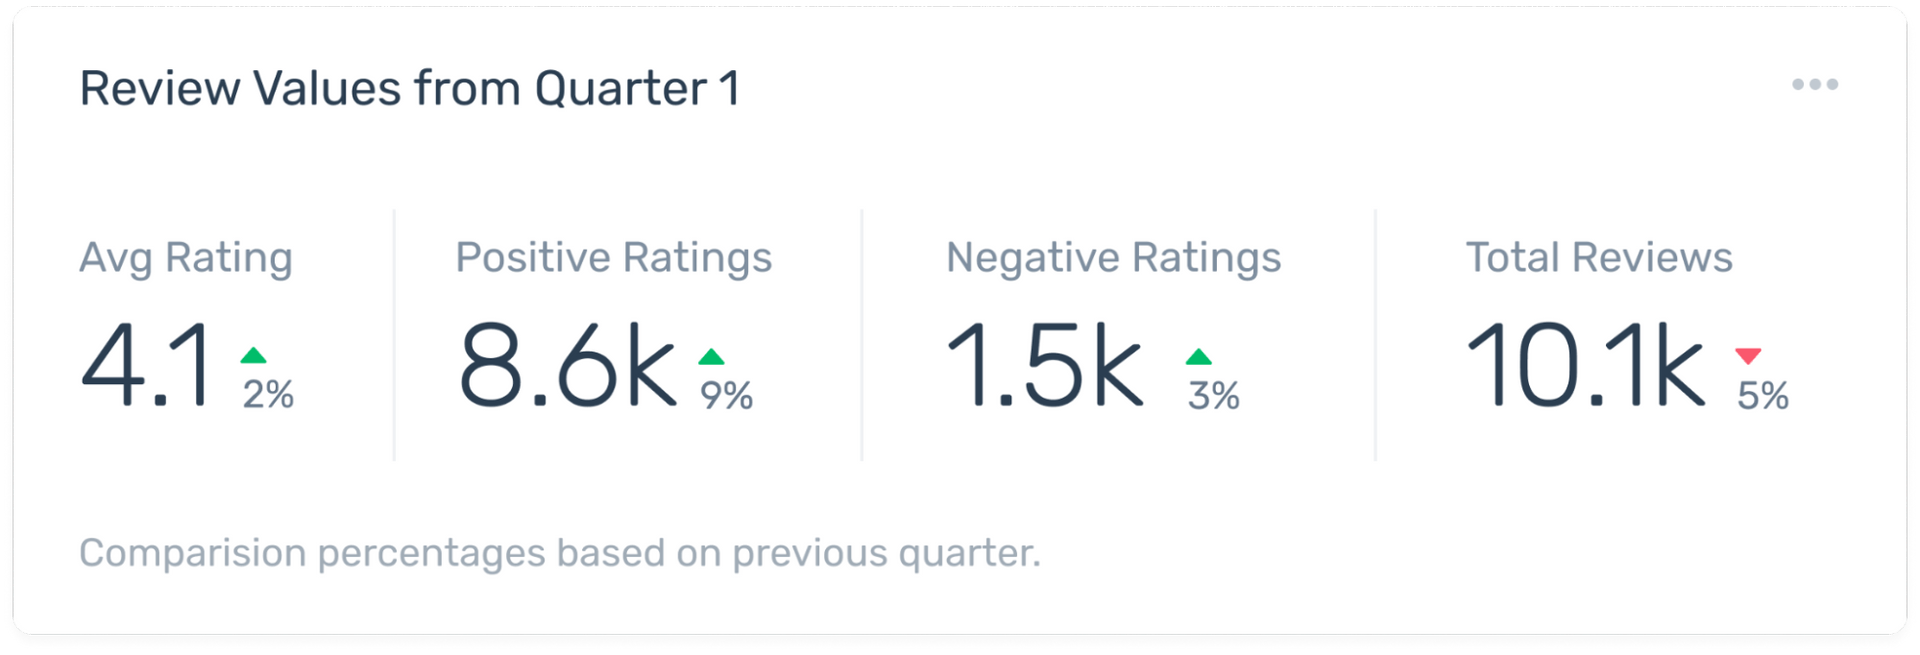 Reveiw values from Q1 including average rating, positive ratings, negative ratings, and total reviews.